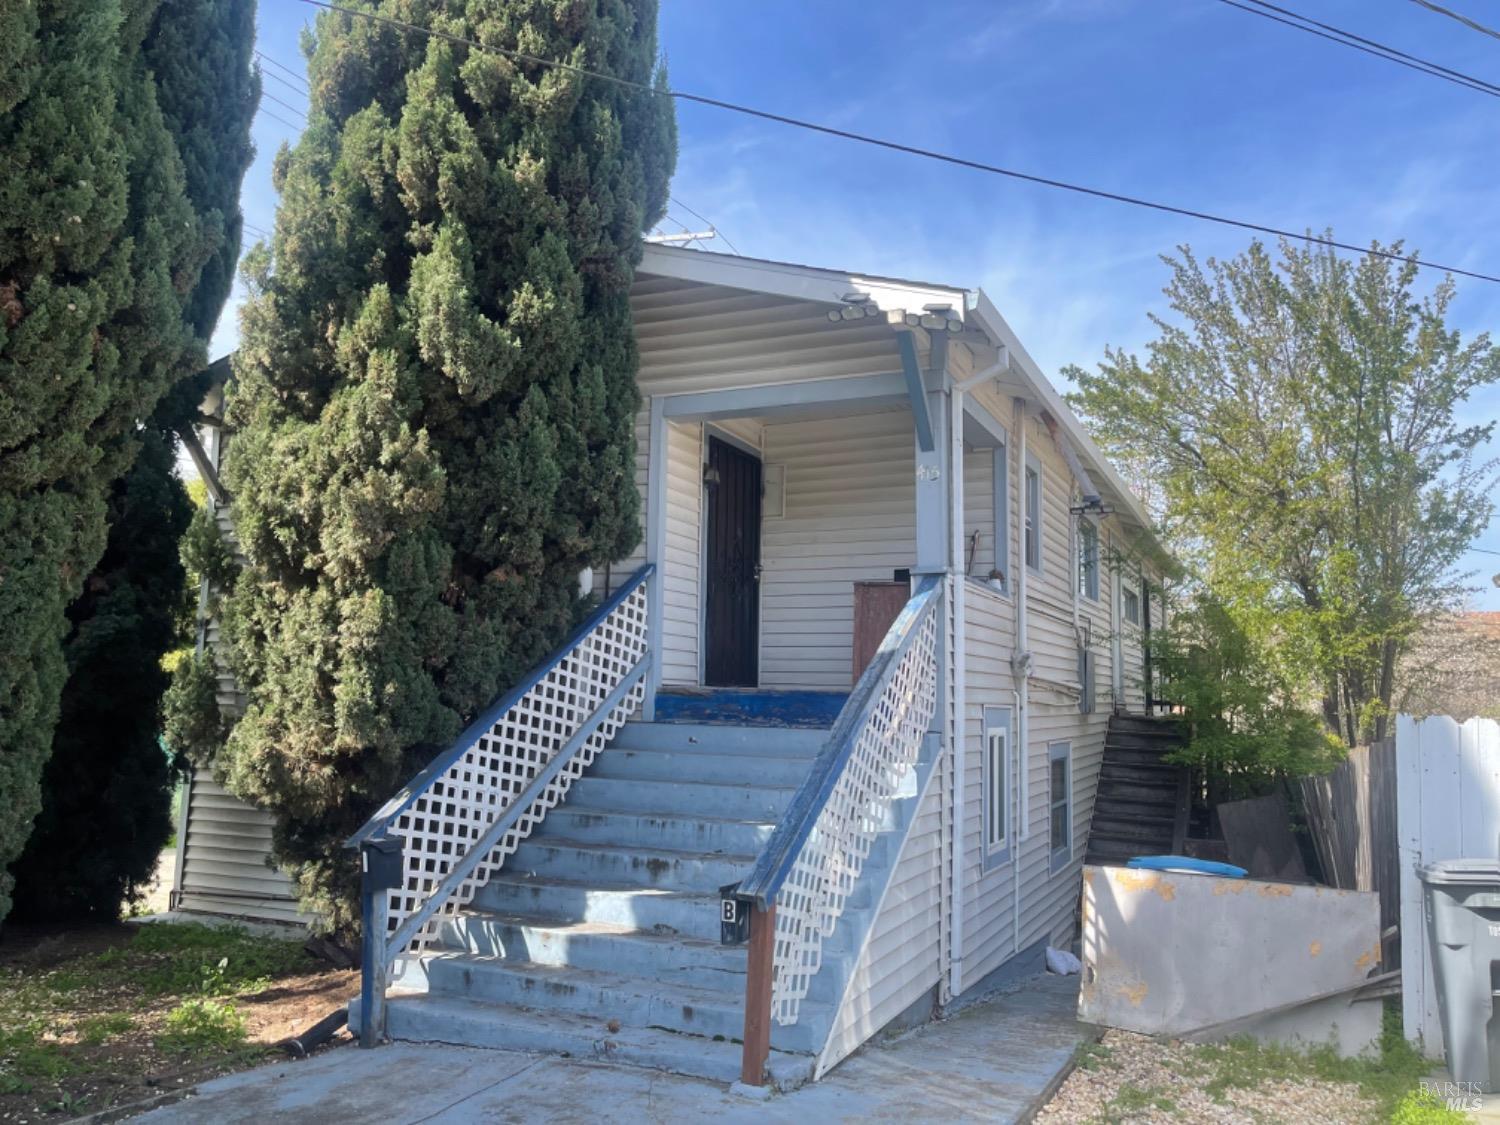 Duplex for great income potential. Upstairs unit has 3bed/2bath and is 1027square feet.  Downstairs 